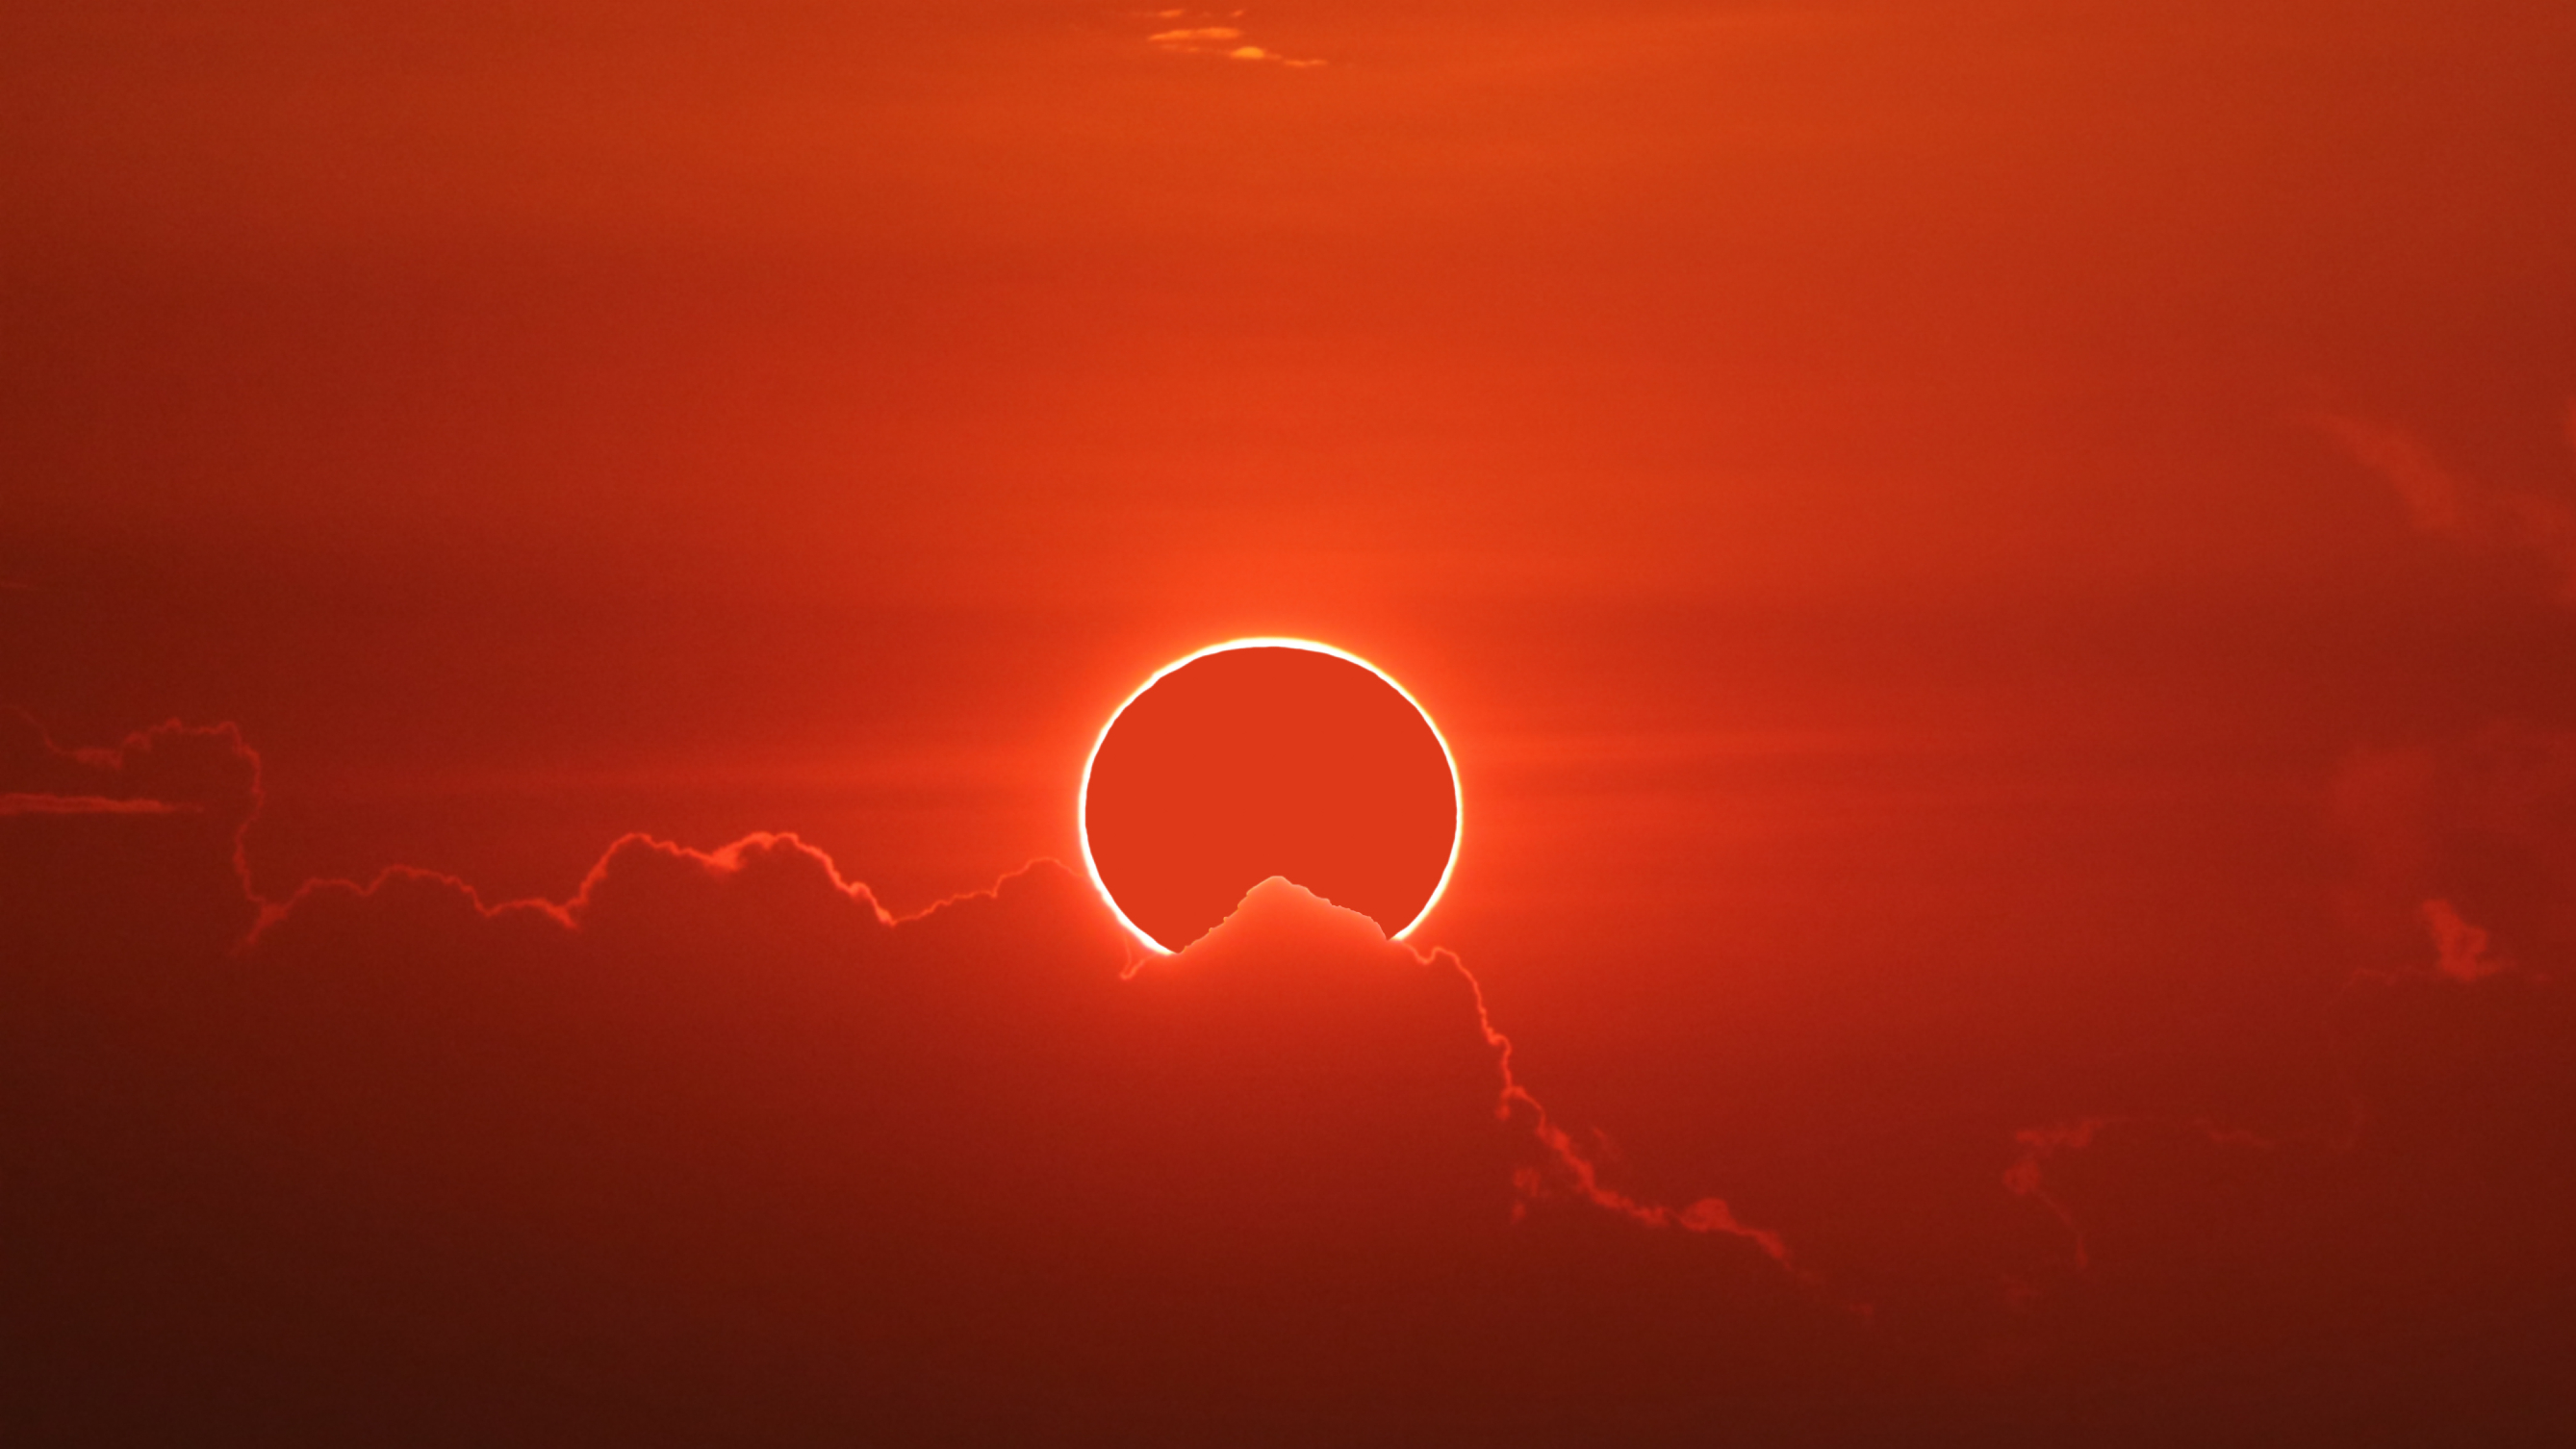 Solar eclipse photographed in Chon Buri, Thailand. The red hue image shows a distinct 'ring of fire' glowing in the sky, slightly obscured by a cloud.